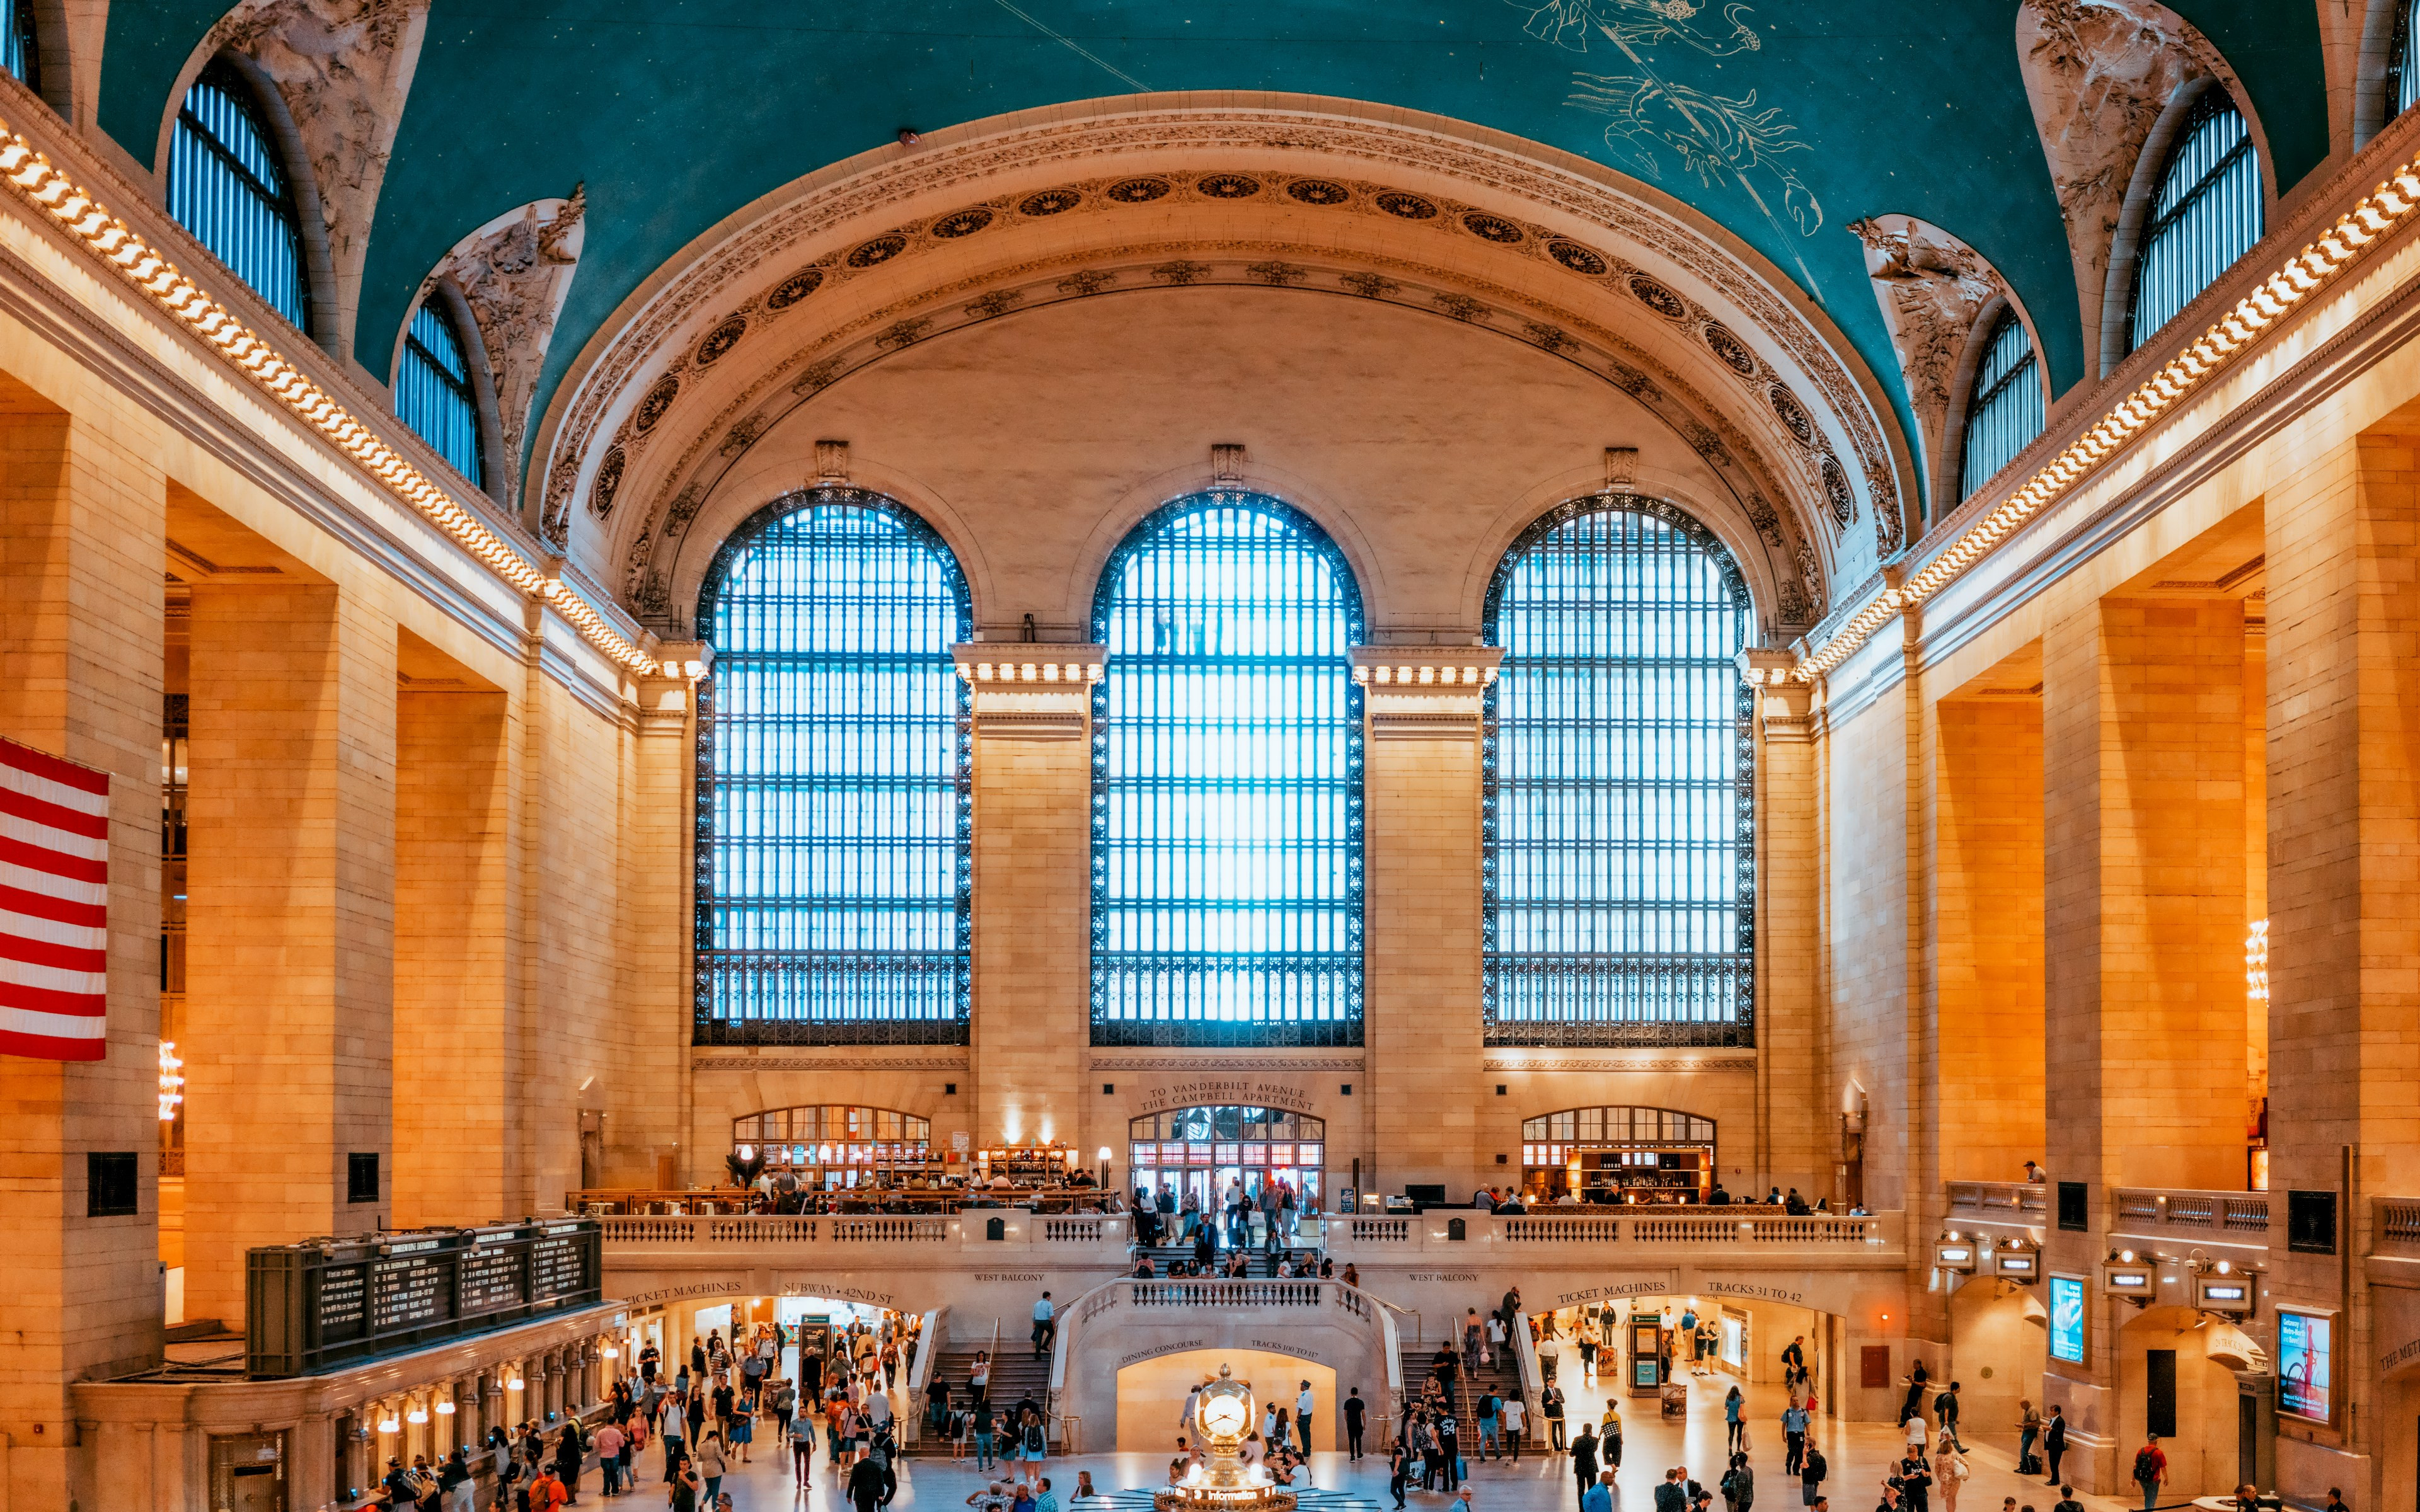 Download Wallpaper: Grand Central Terminal, New York, United States